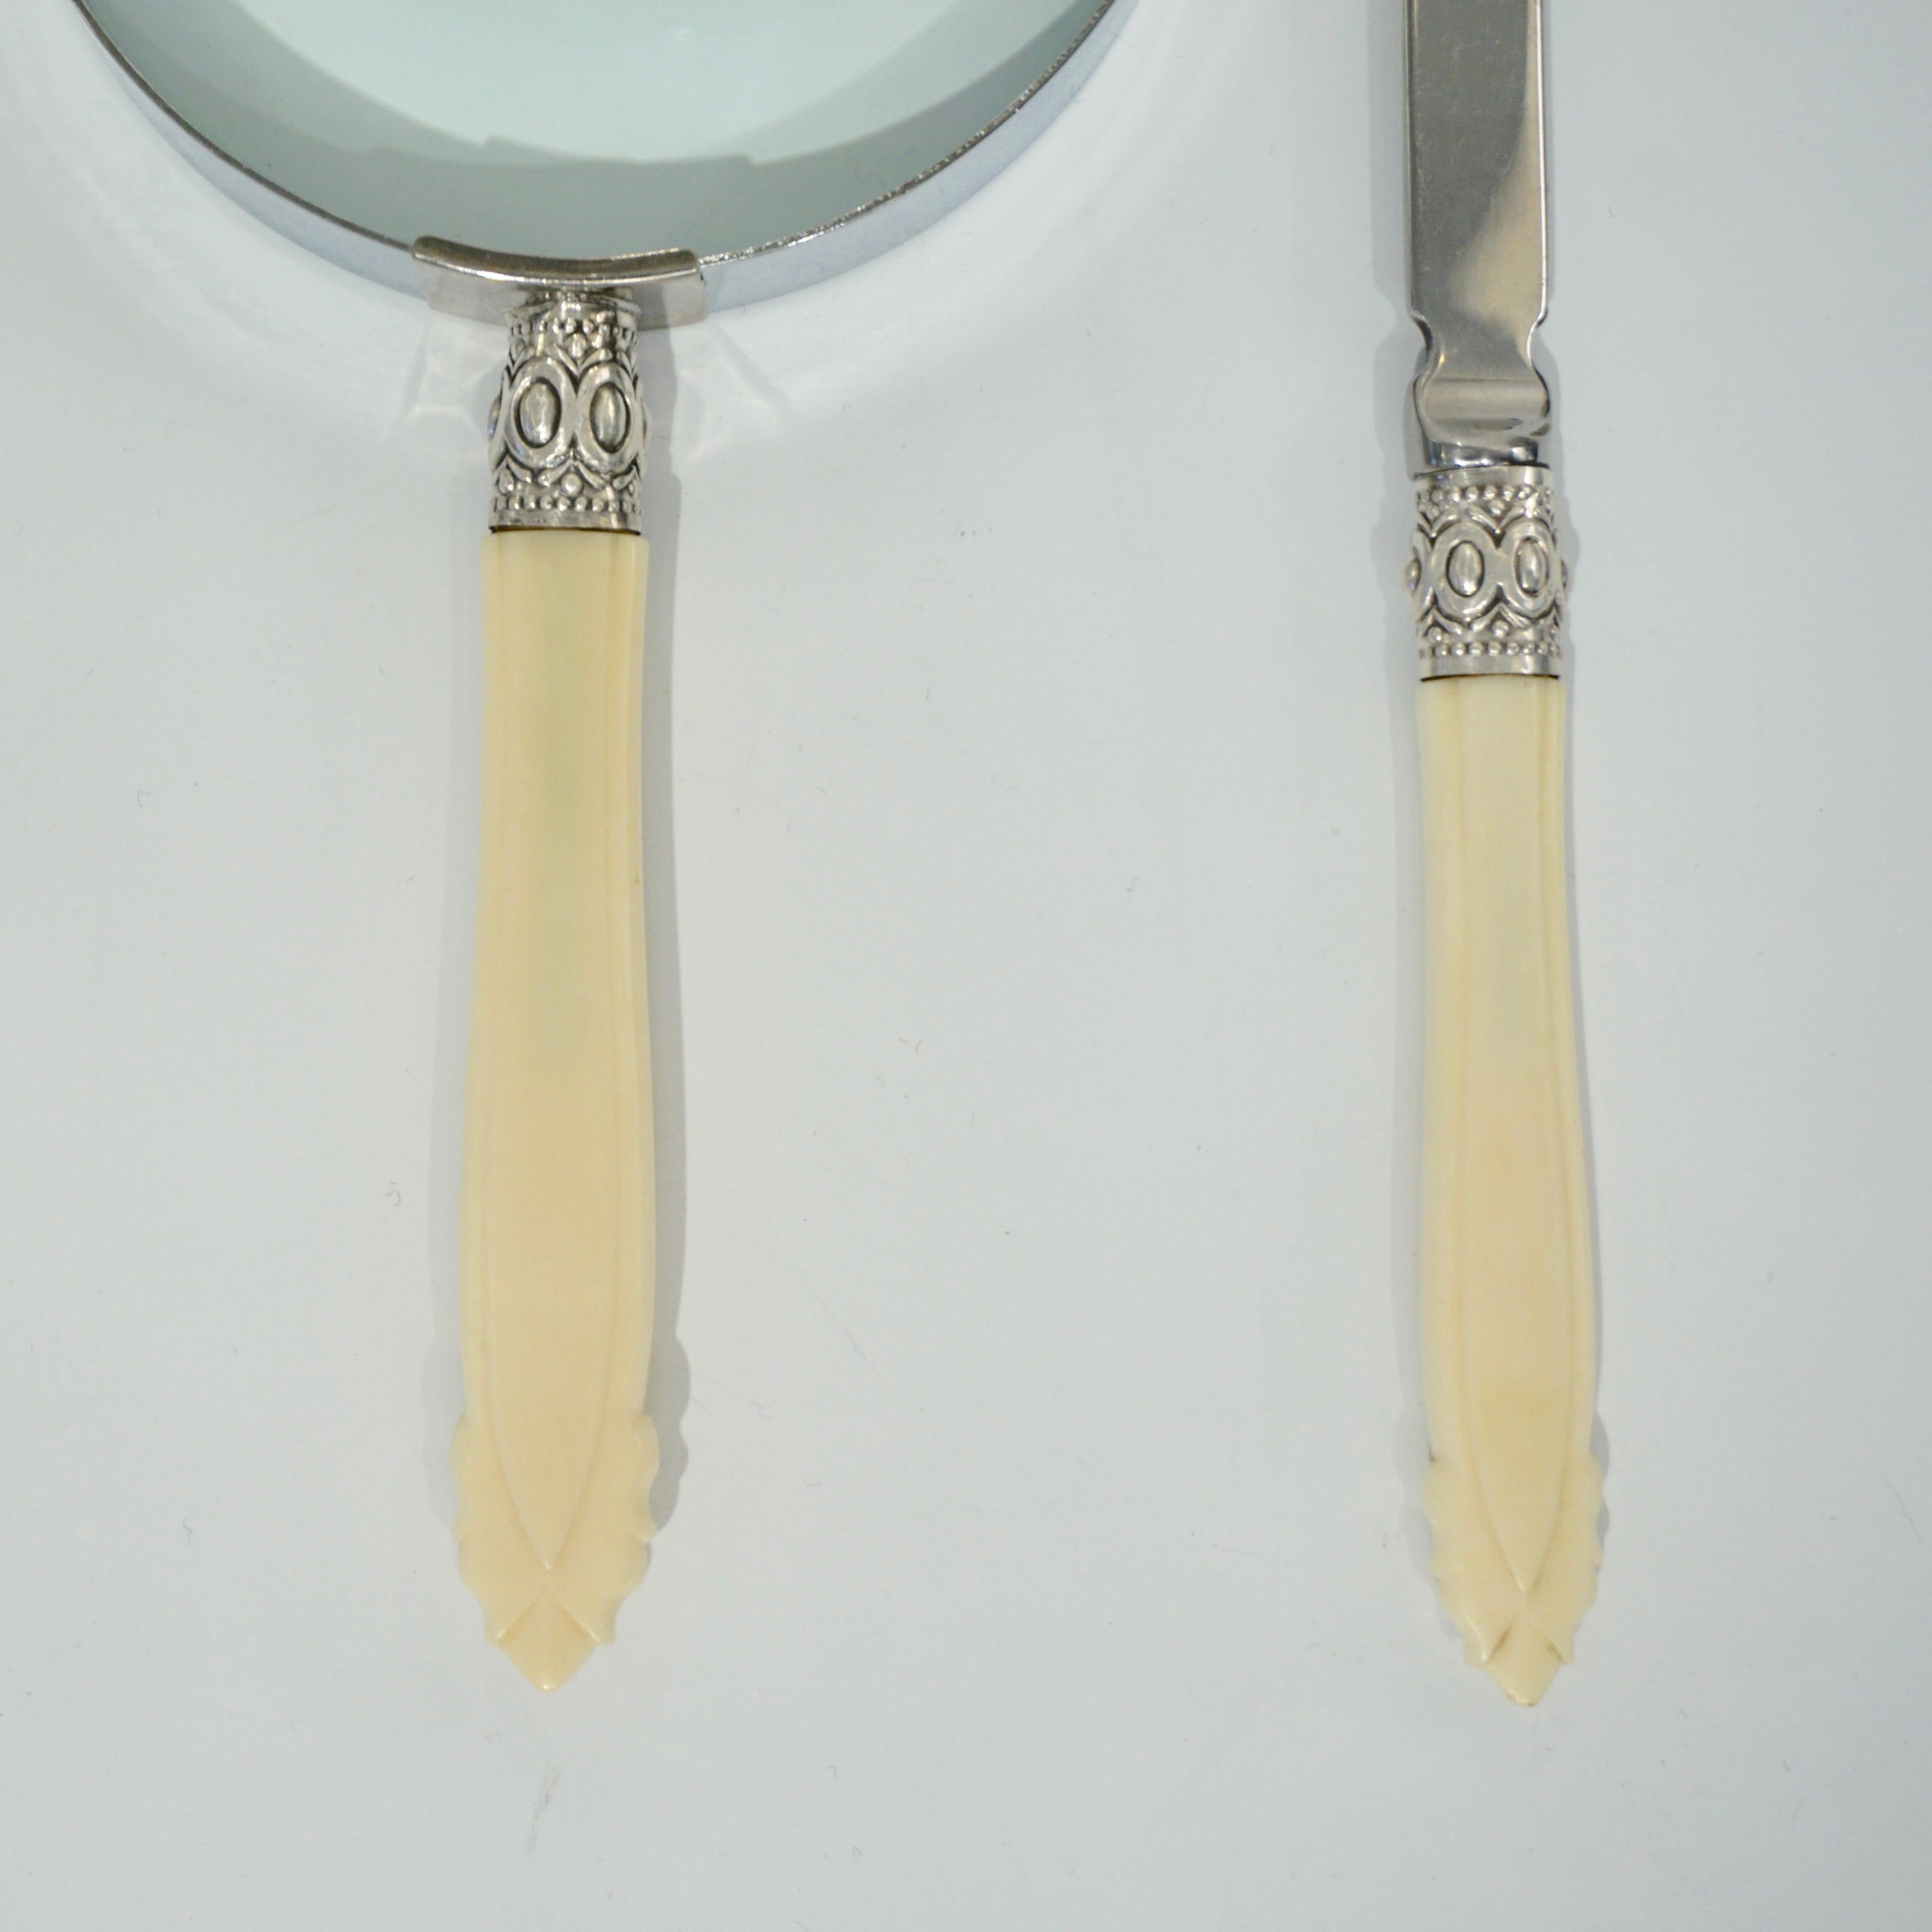 Edwardian English Magnifying Glass and Letter Opener Desk Set with Horn Handles 1970s